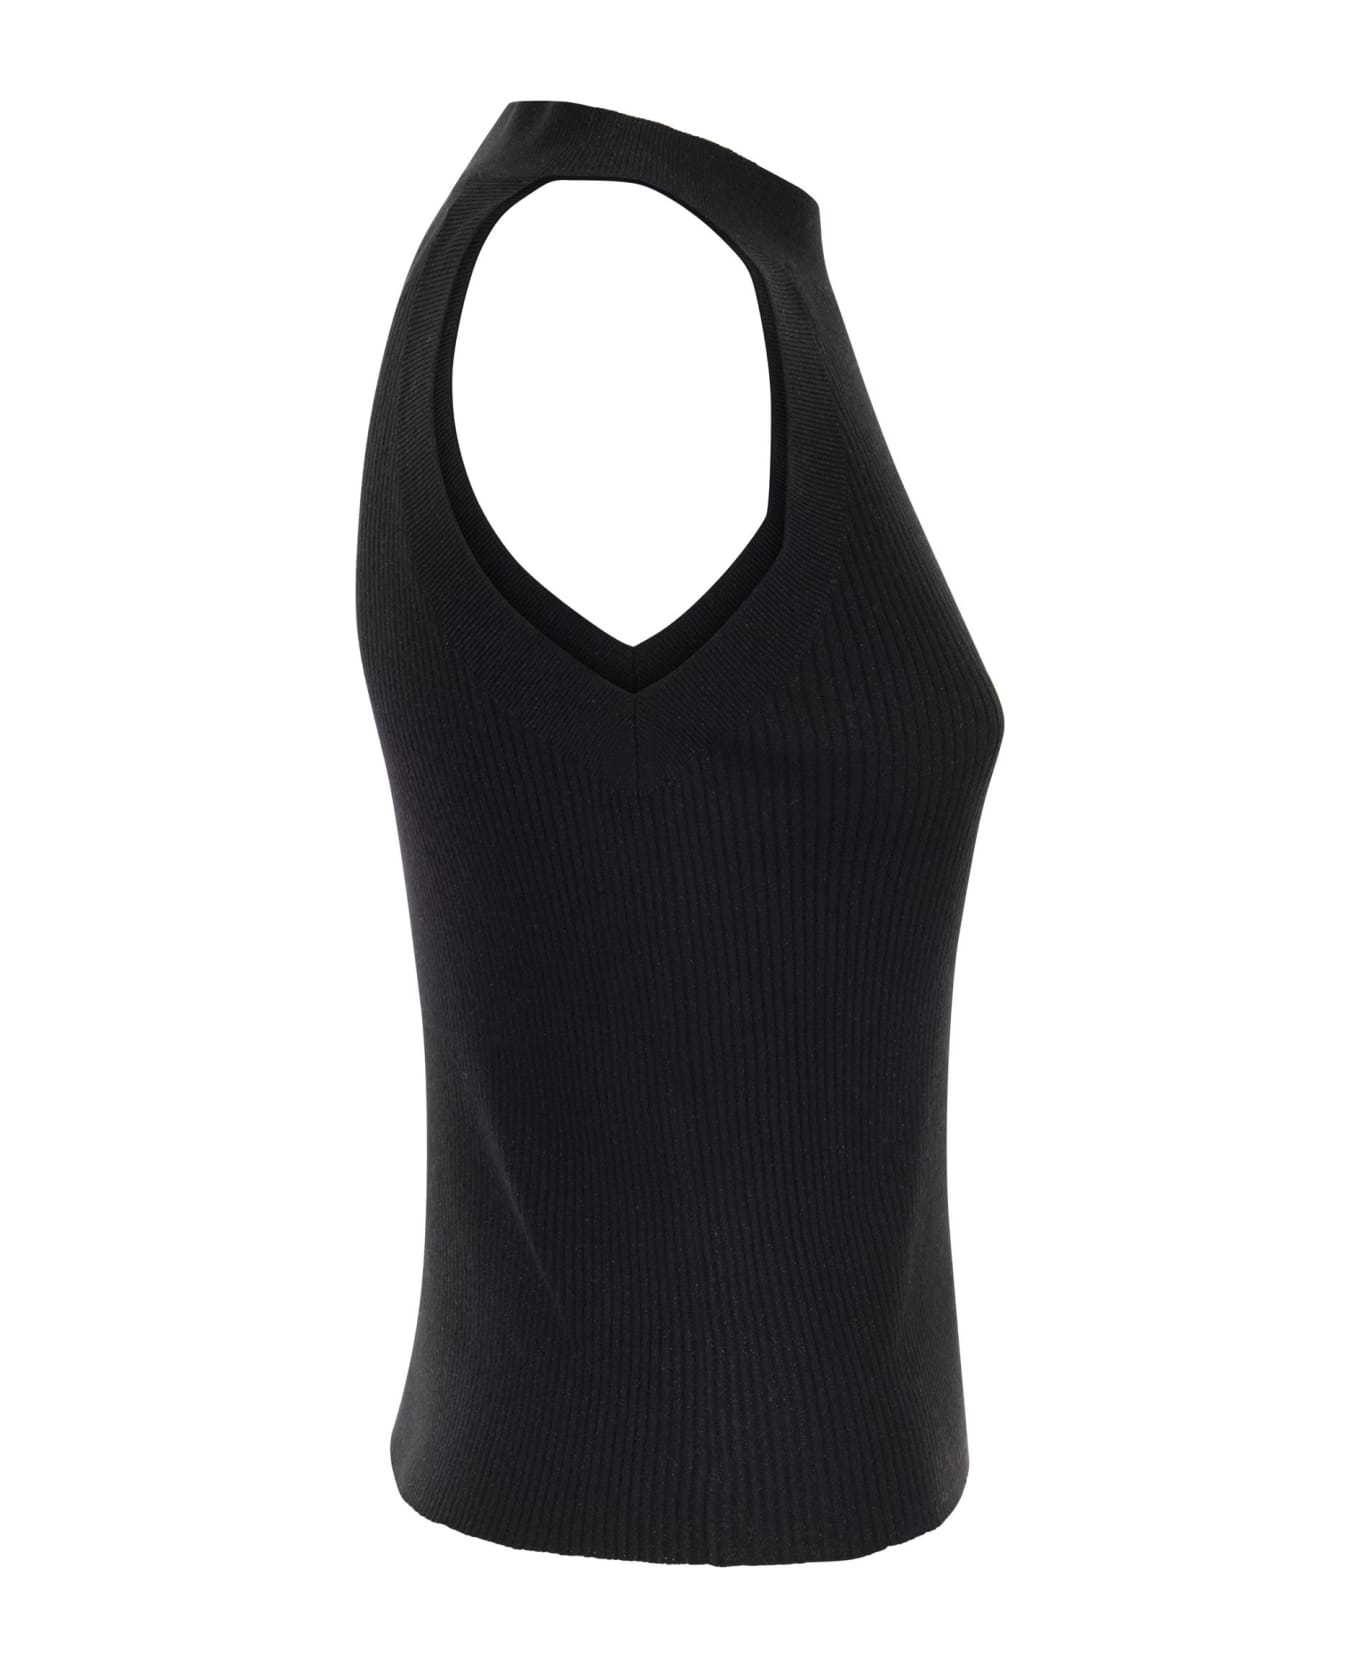 Brunello Cucinelli Cashmere And Silk Ribbed Knit Top - Black タンクトップ